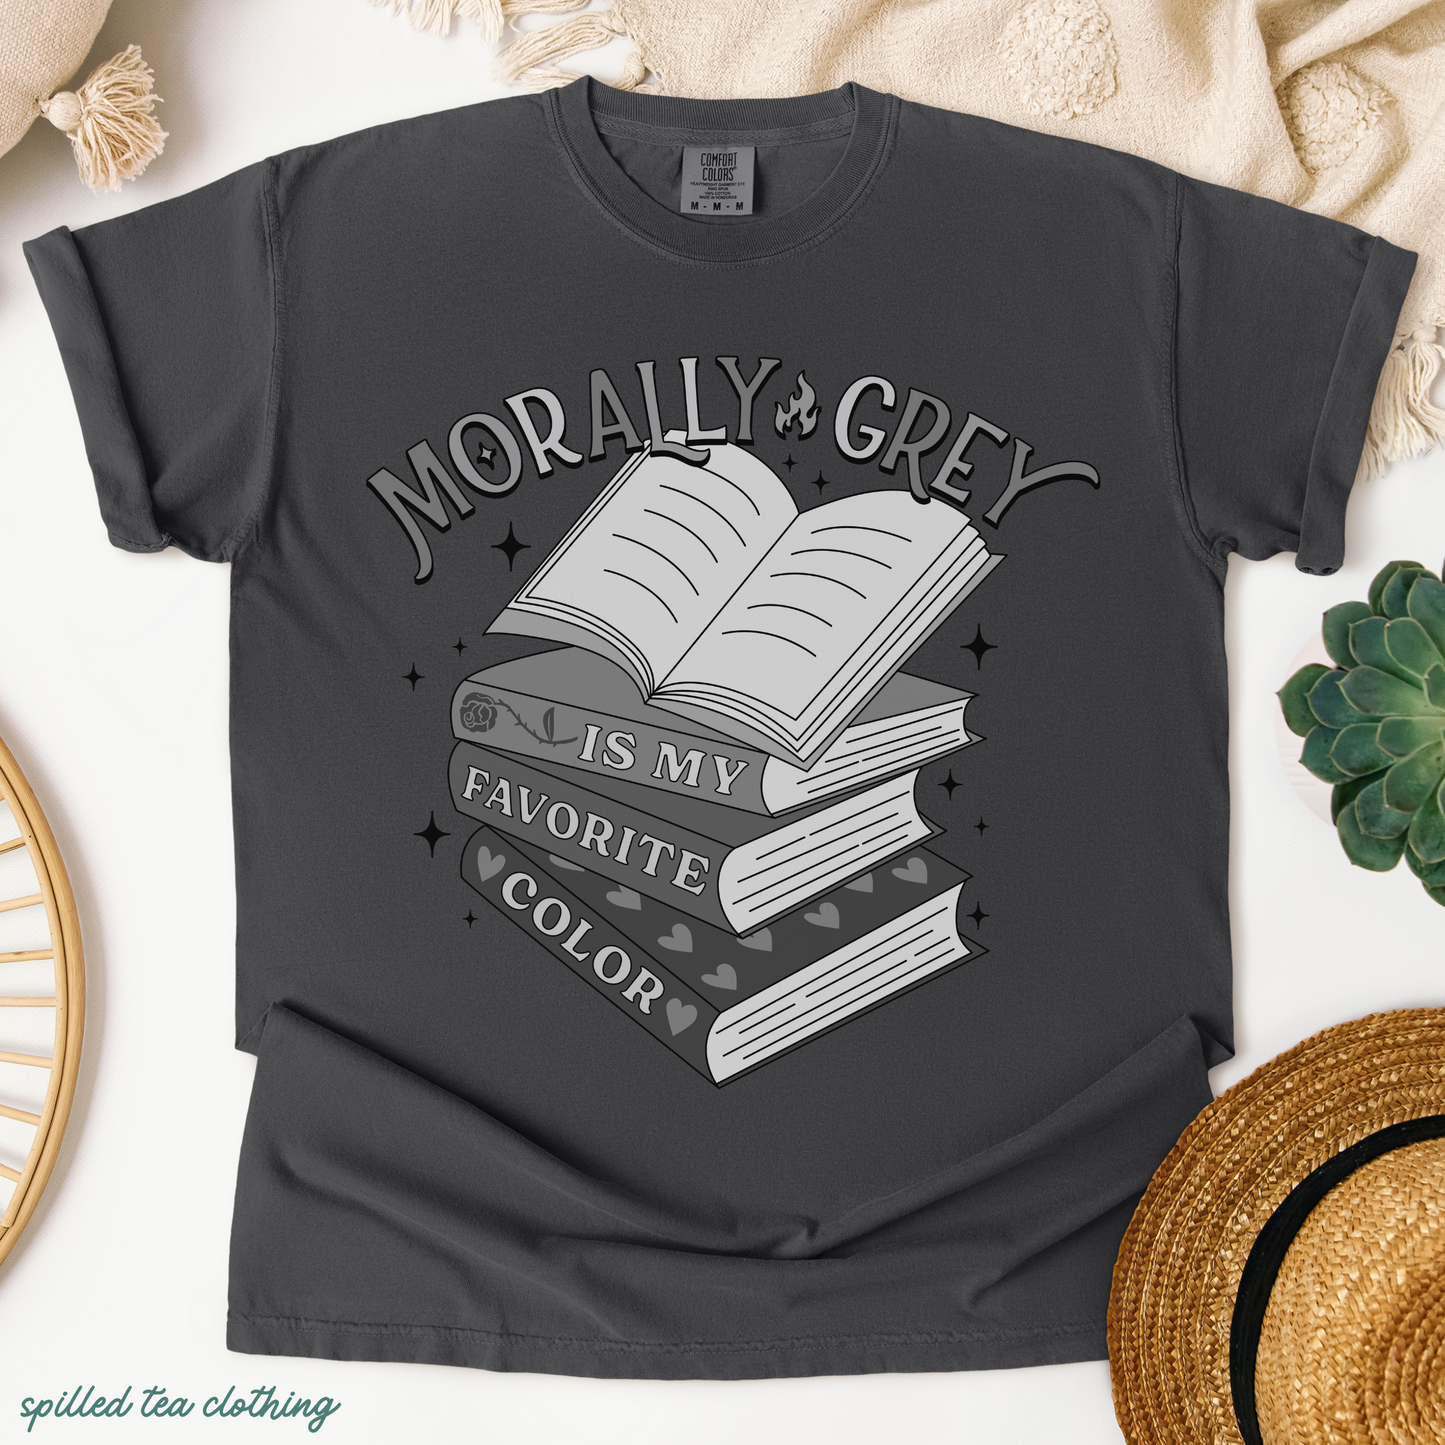 Morally Grey Is My Favorite Color T-Shirt